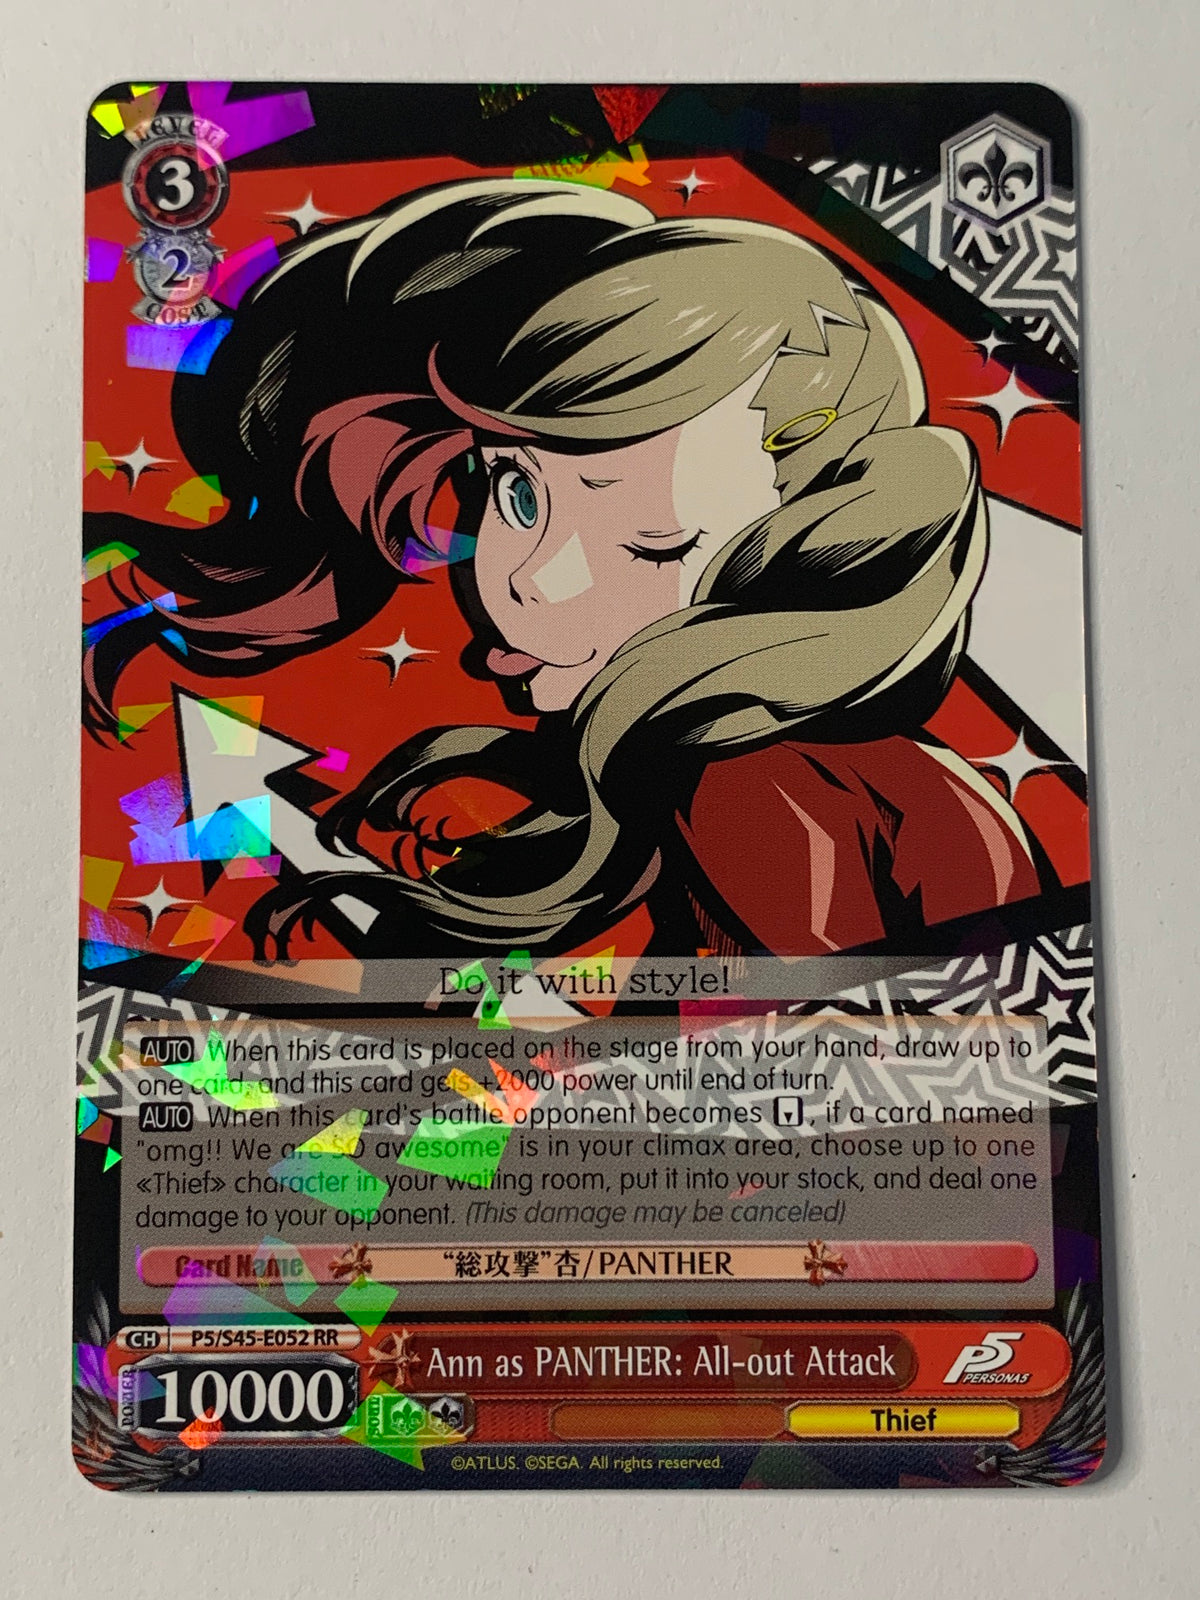 Ann as PANTHER: All-out Attack - P5/S45-E052 RR (M/NM)